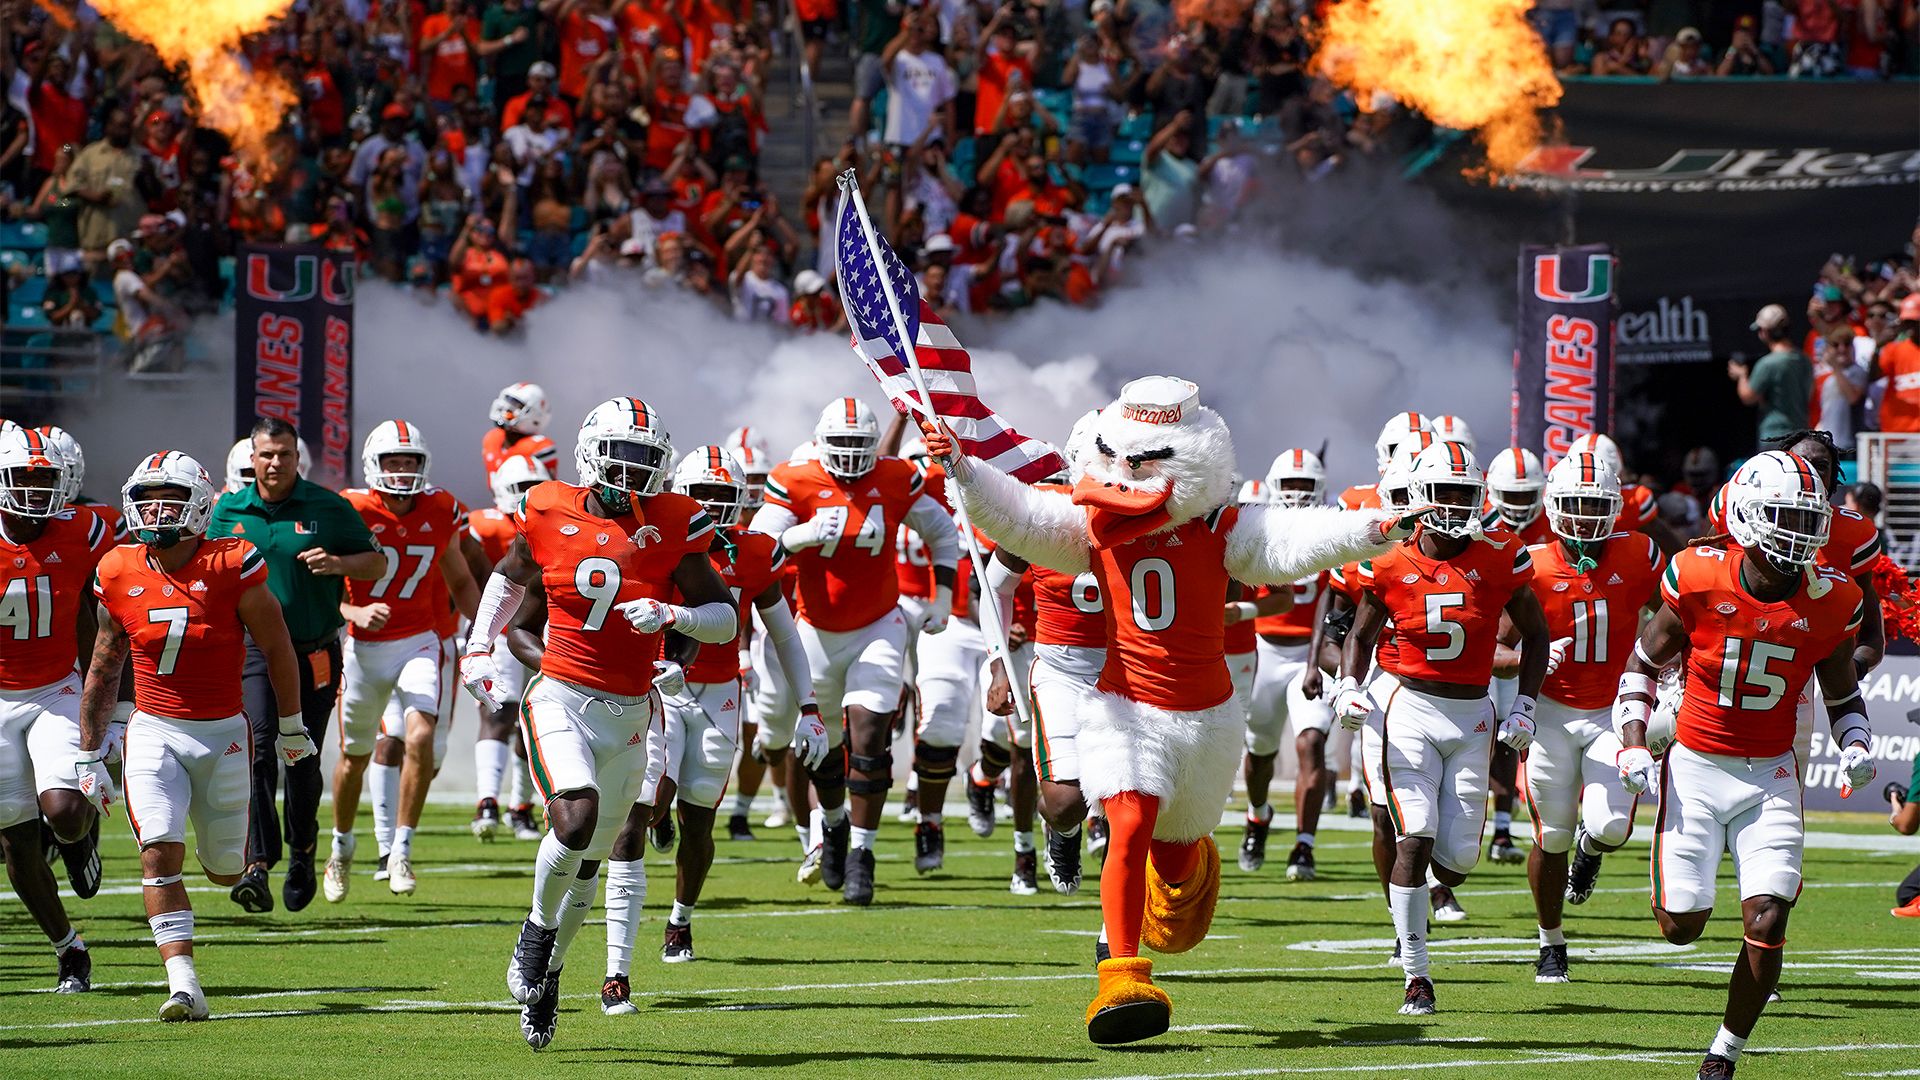 Canes Look to Build on Early Success